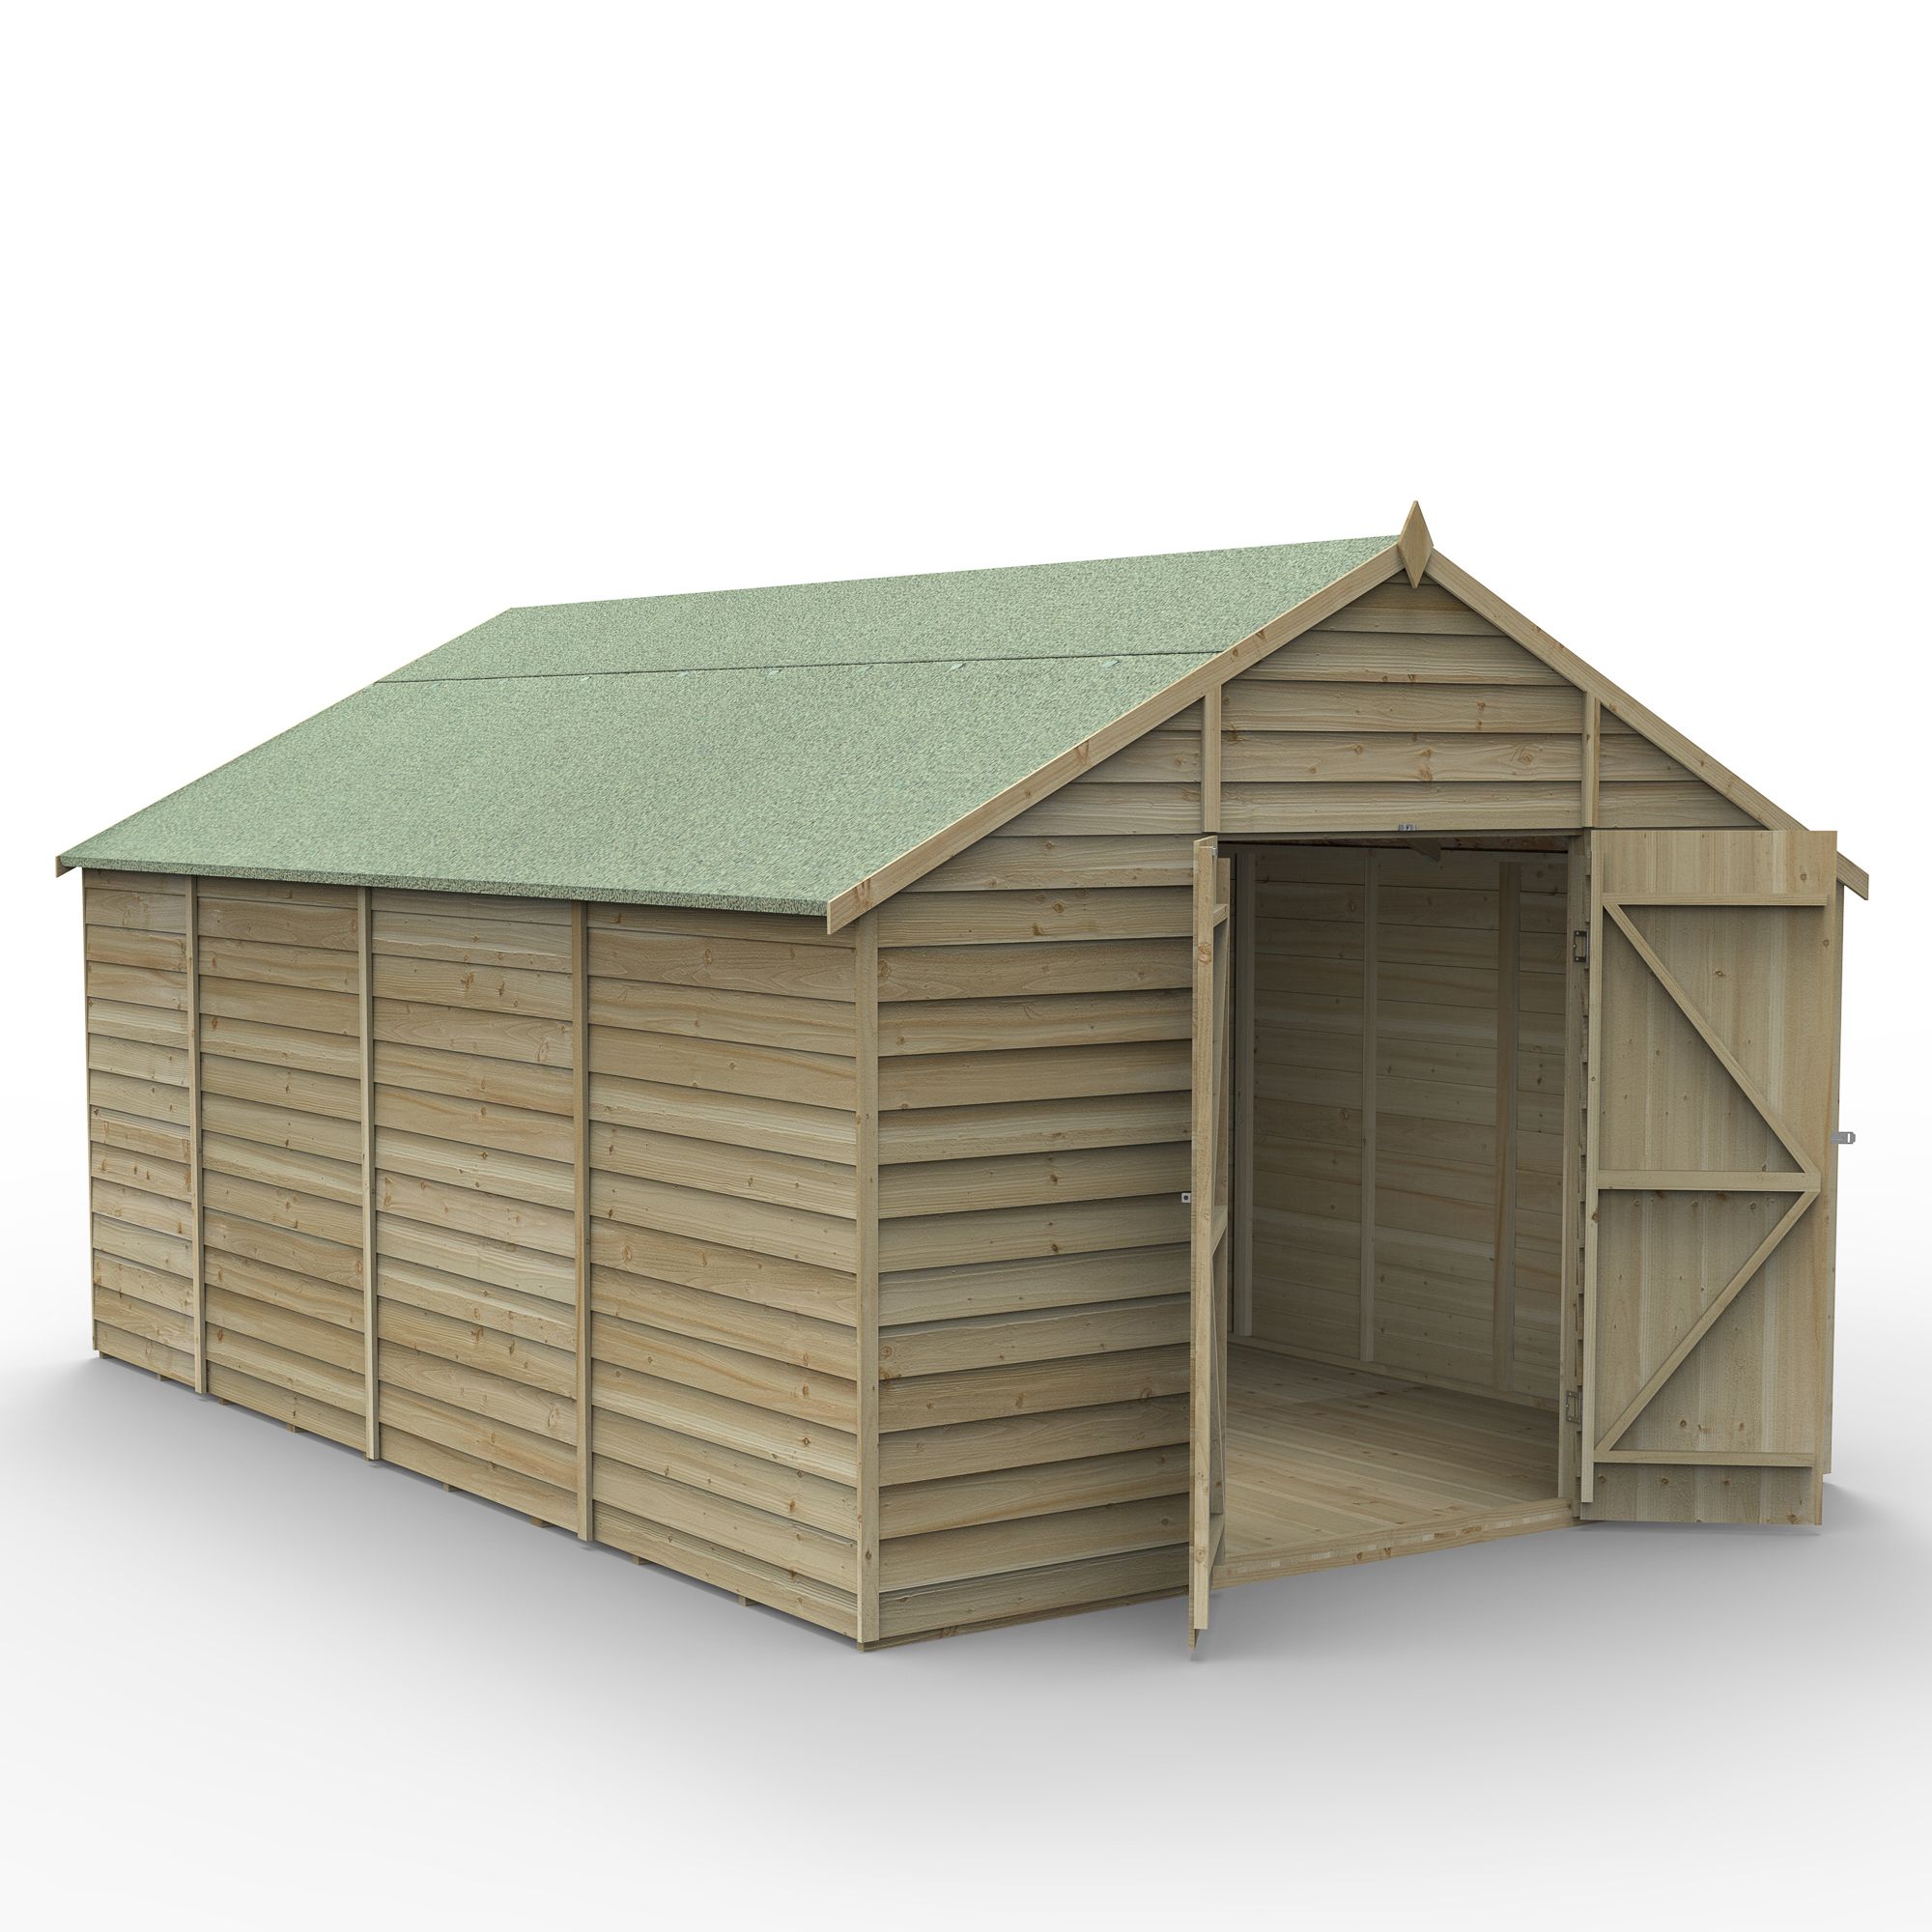 Forest Garden Overlap 10x15 ft Apex Wooden 2 door Shed with floor - Assembly service included